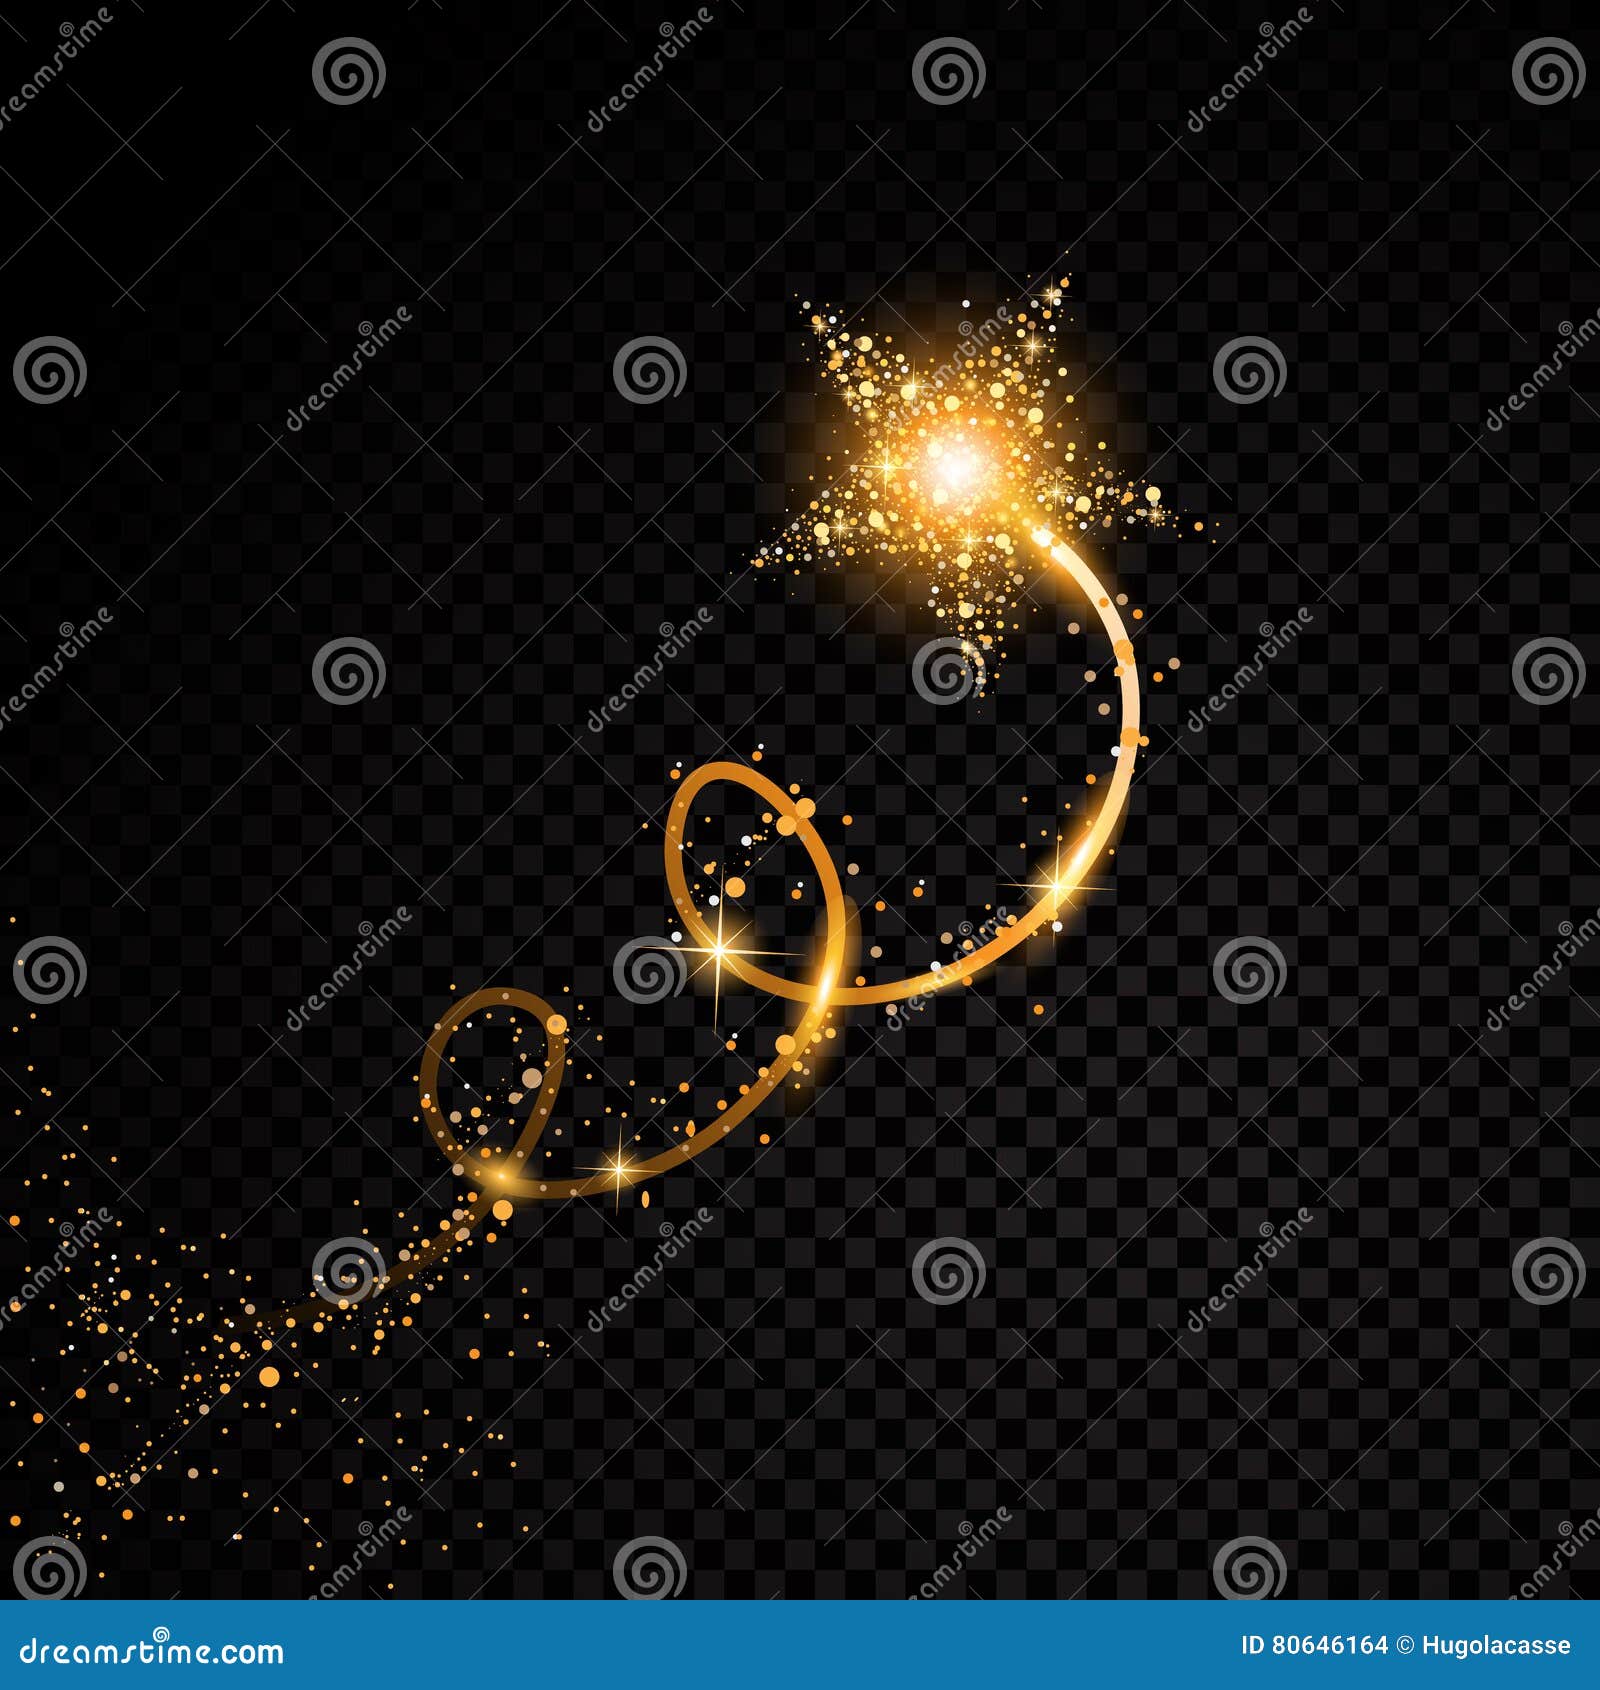 gold glittering spiral star dust trail sparkling particles on transparent background.